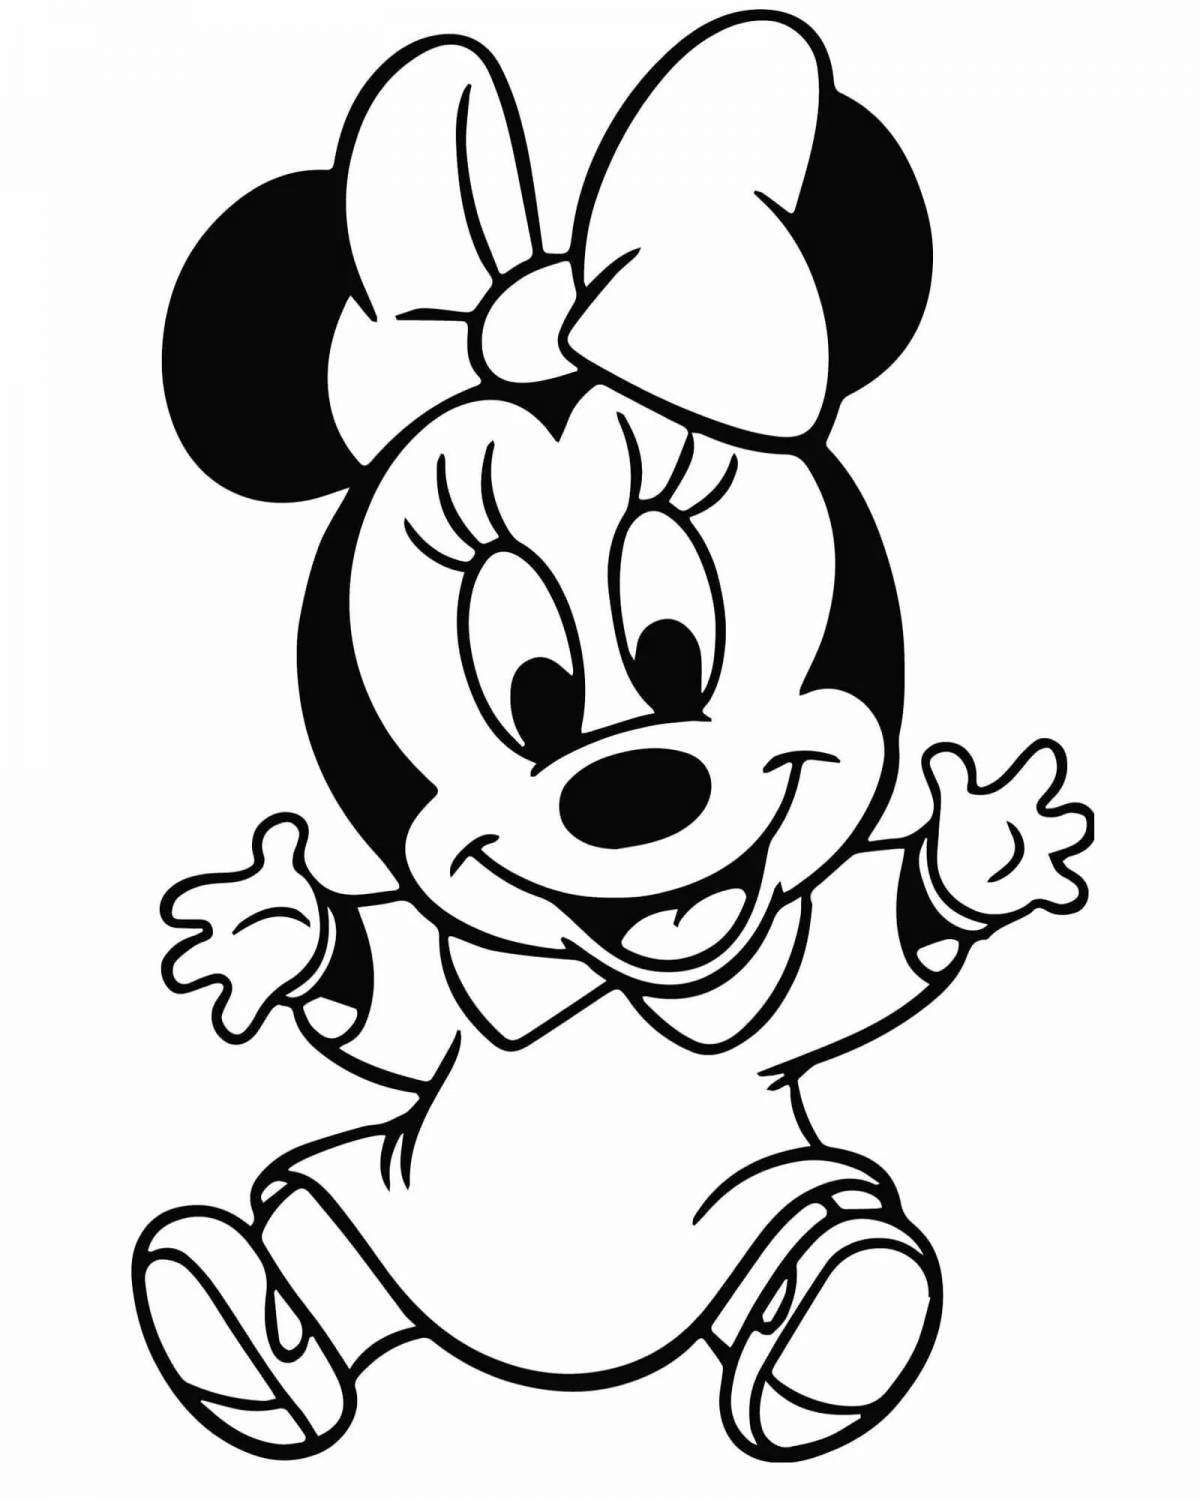 Fairy mickey mouse coloring book for kids